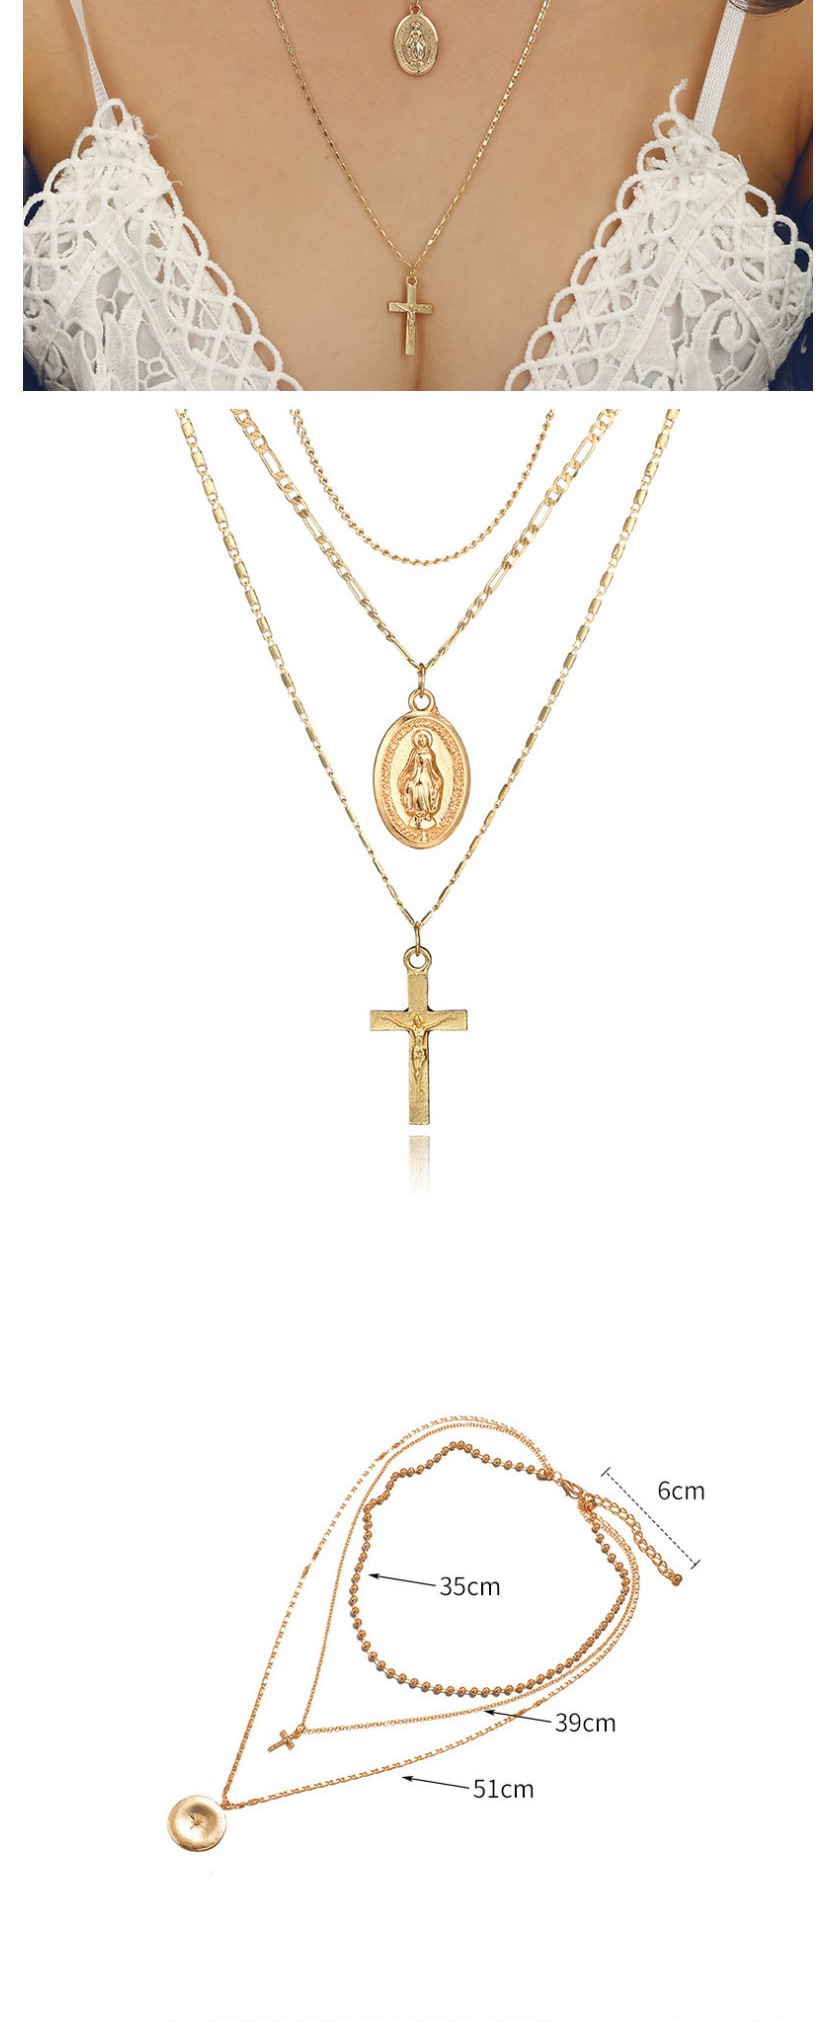 Fashion Golden Cross Moon Oval Portrait Multilayer Necklace,Multi Strand Necklaces